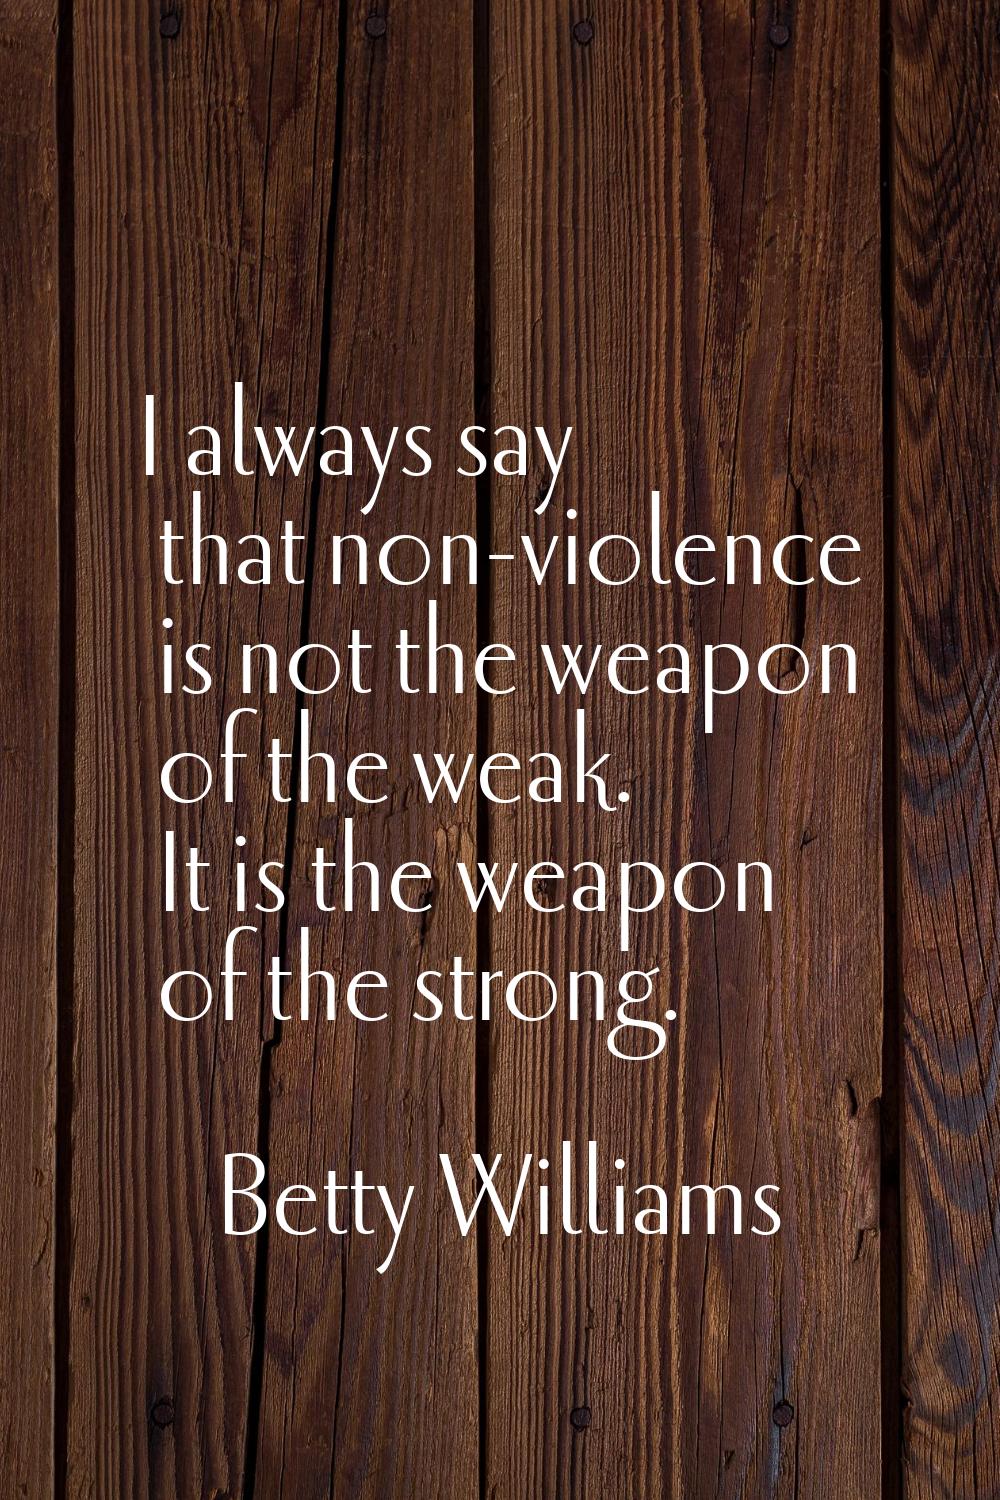 I always say that non-violence is not the weapon of the weak. It is the weapon of the strong.